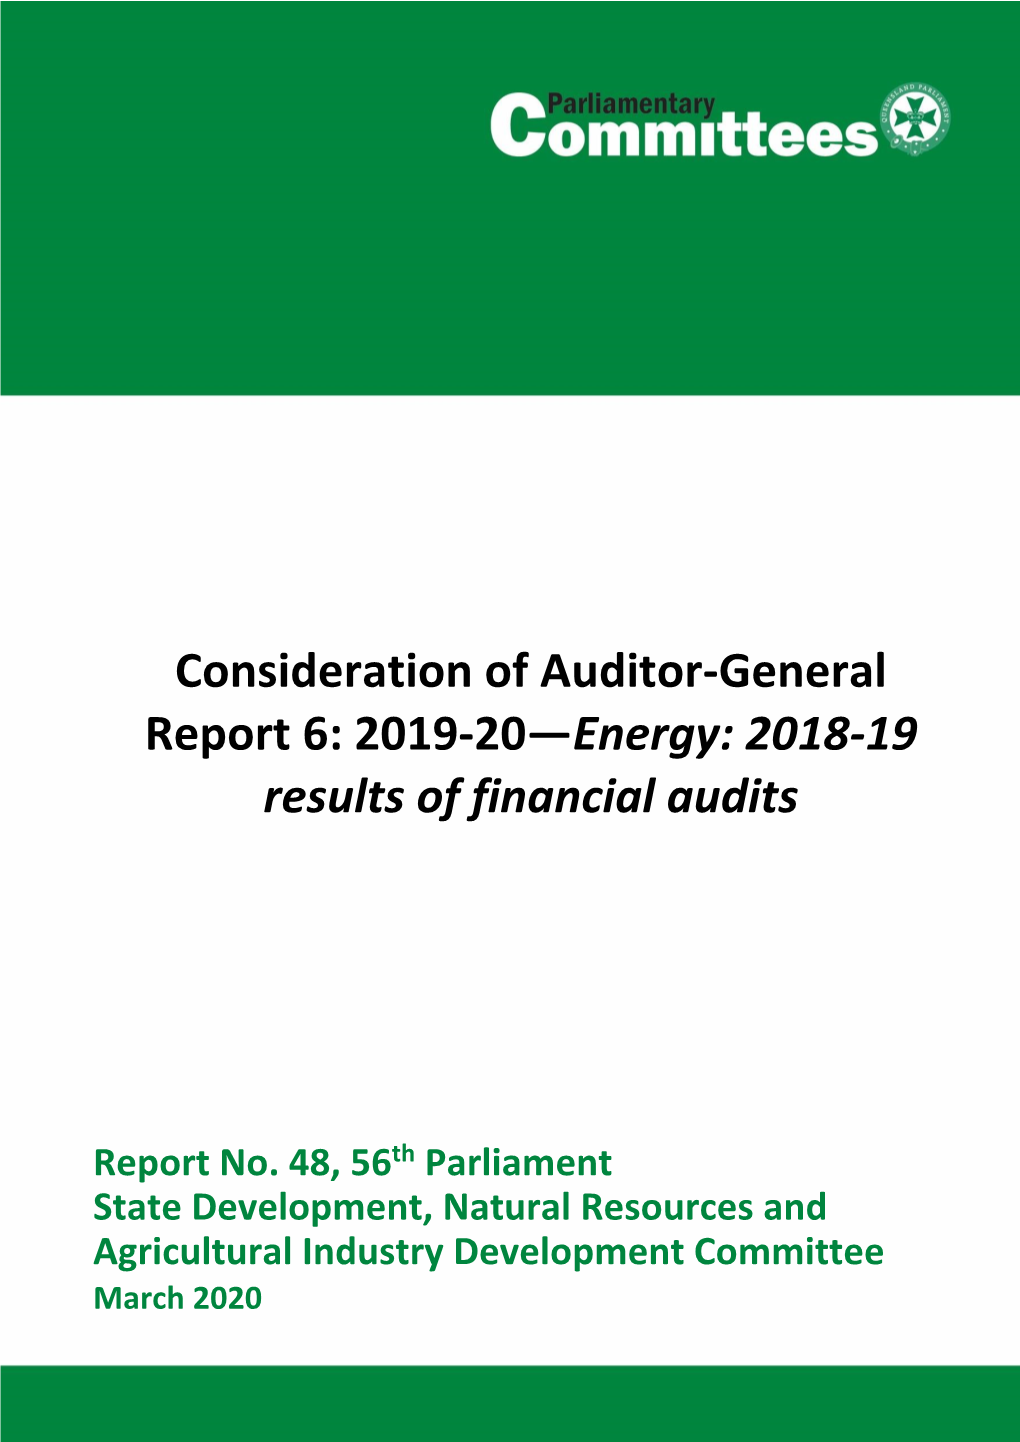 Consideration of Auditor-General Report 6: 2019-20—Energy: 2018-19 Results of Financial Audits